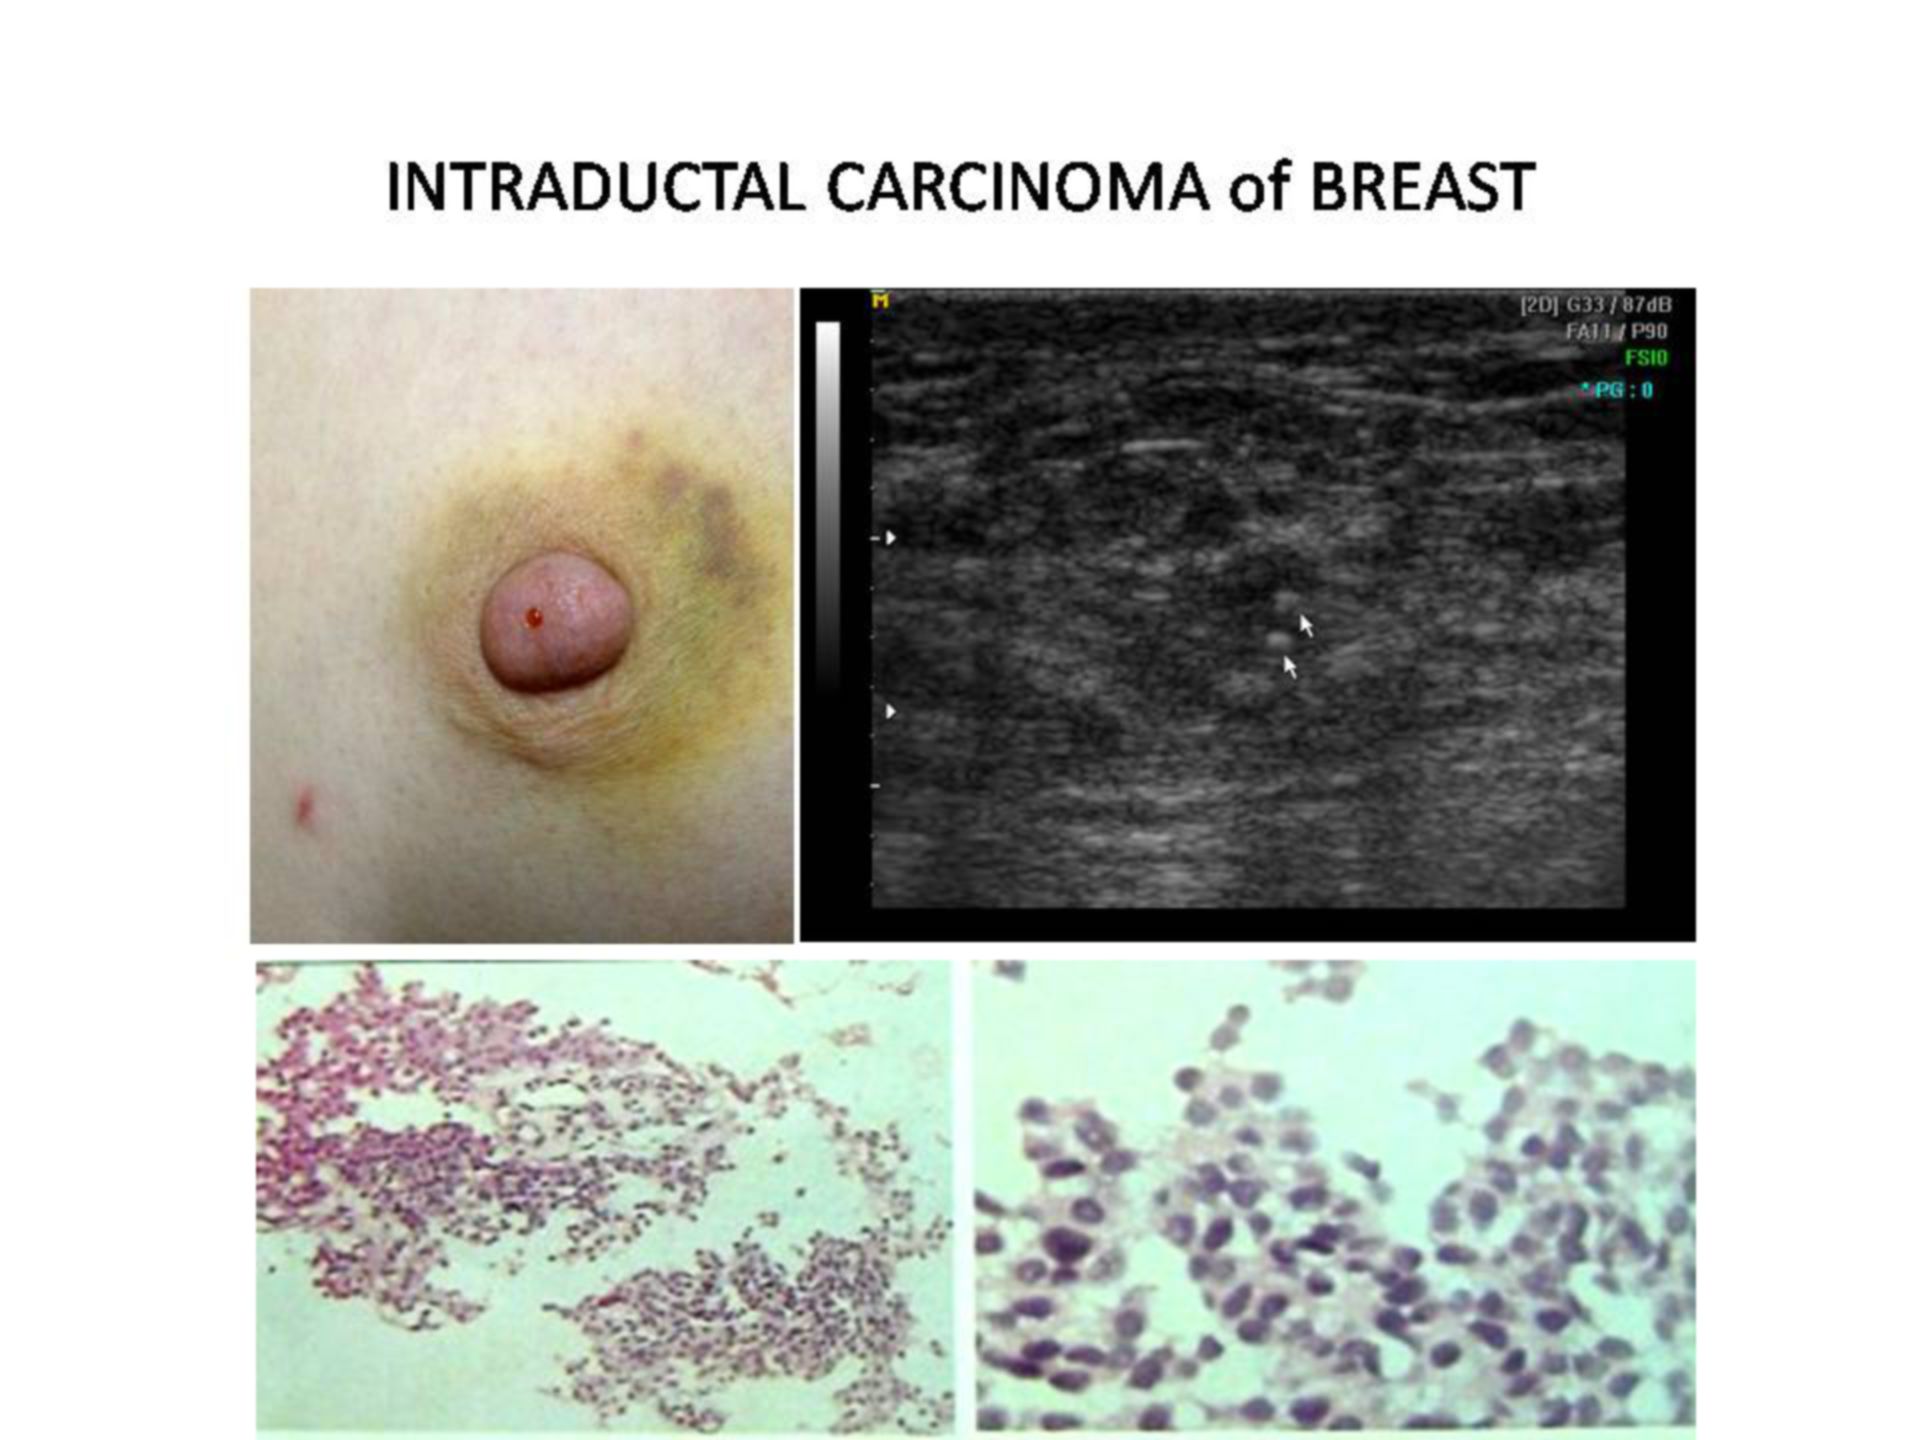 INTRADUCTAL CARCINOMA of BREAST